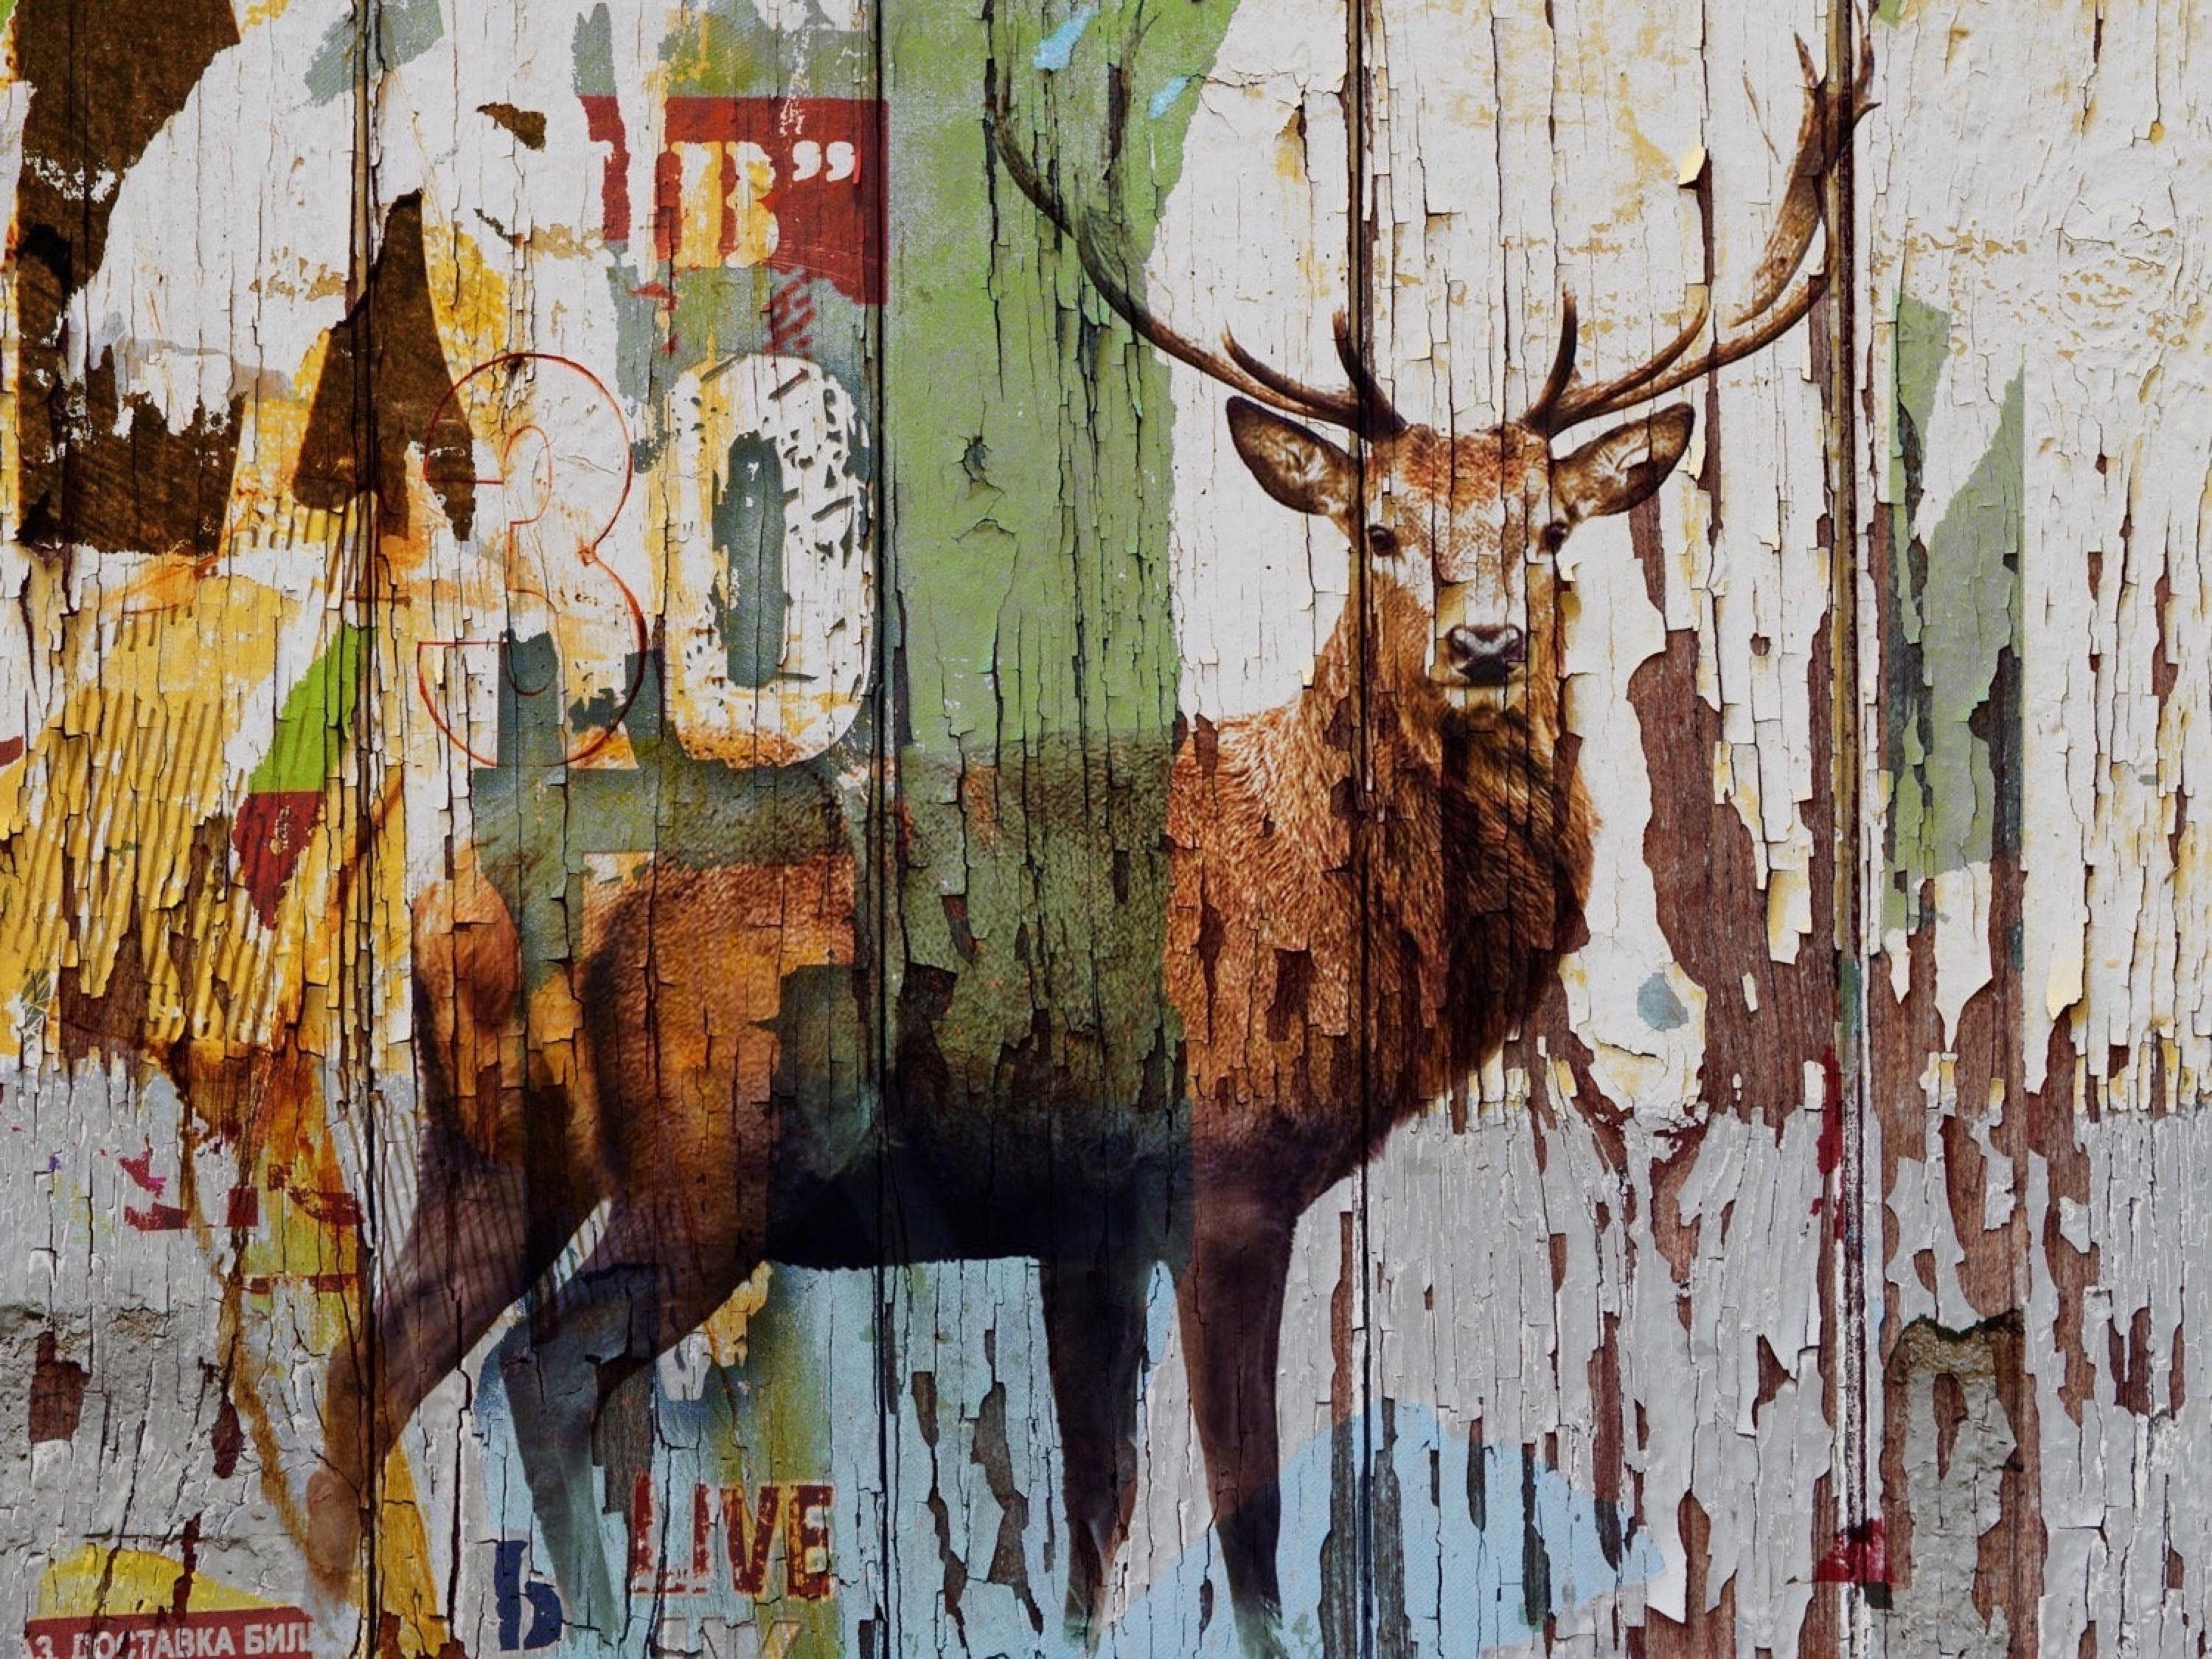 Deer Farmhouse Rustic Mixed Media Painting on Canvas 60 x 40"